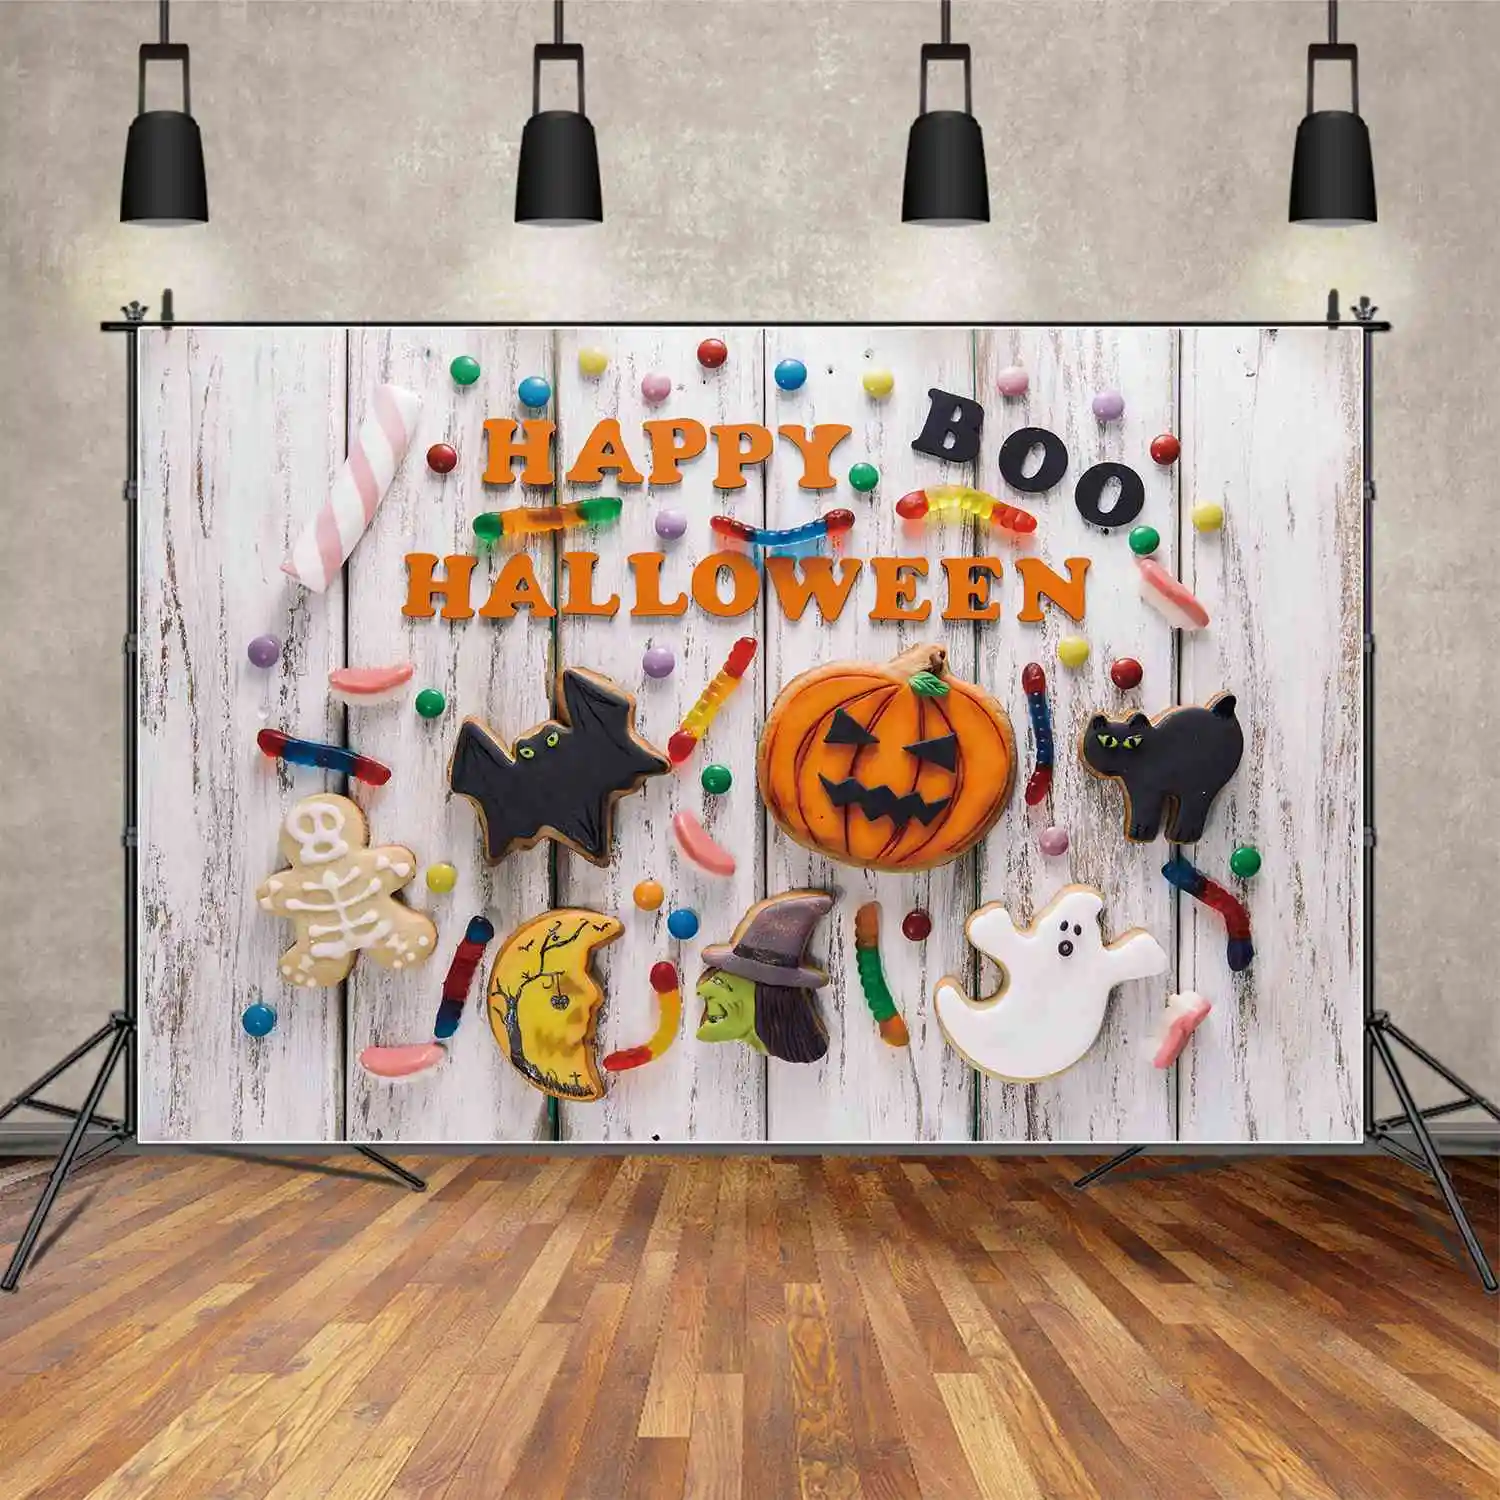 

MOON.QG Backdrop Children Wood Happy Halloween Banner Party Props Background Kids White Wooden Wall Trick Or Treat Photo Booth